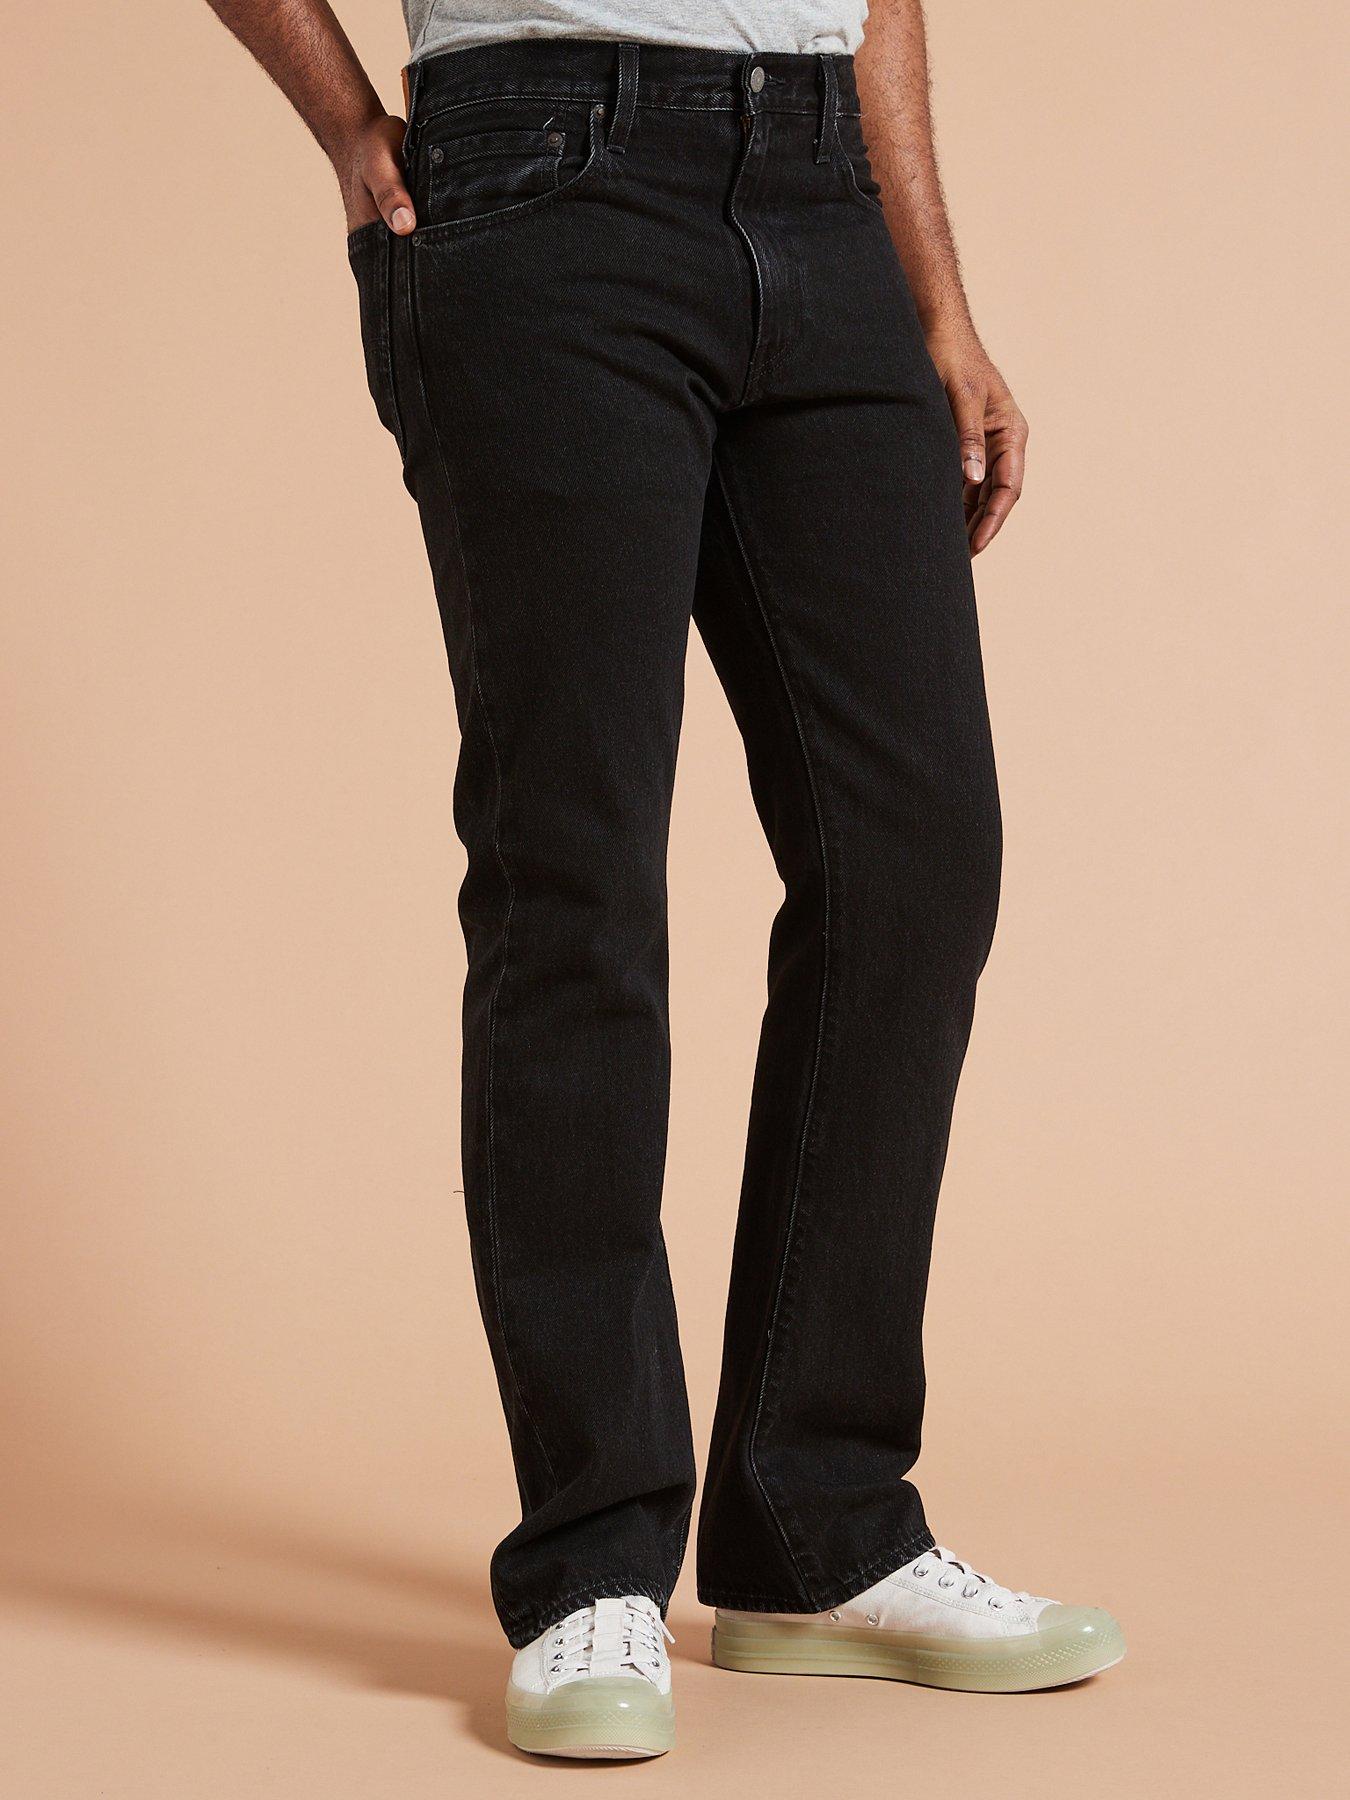 Levi's 517 Straight Bootcut Jeans - Welcome To The Rodeo - Black